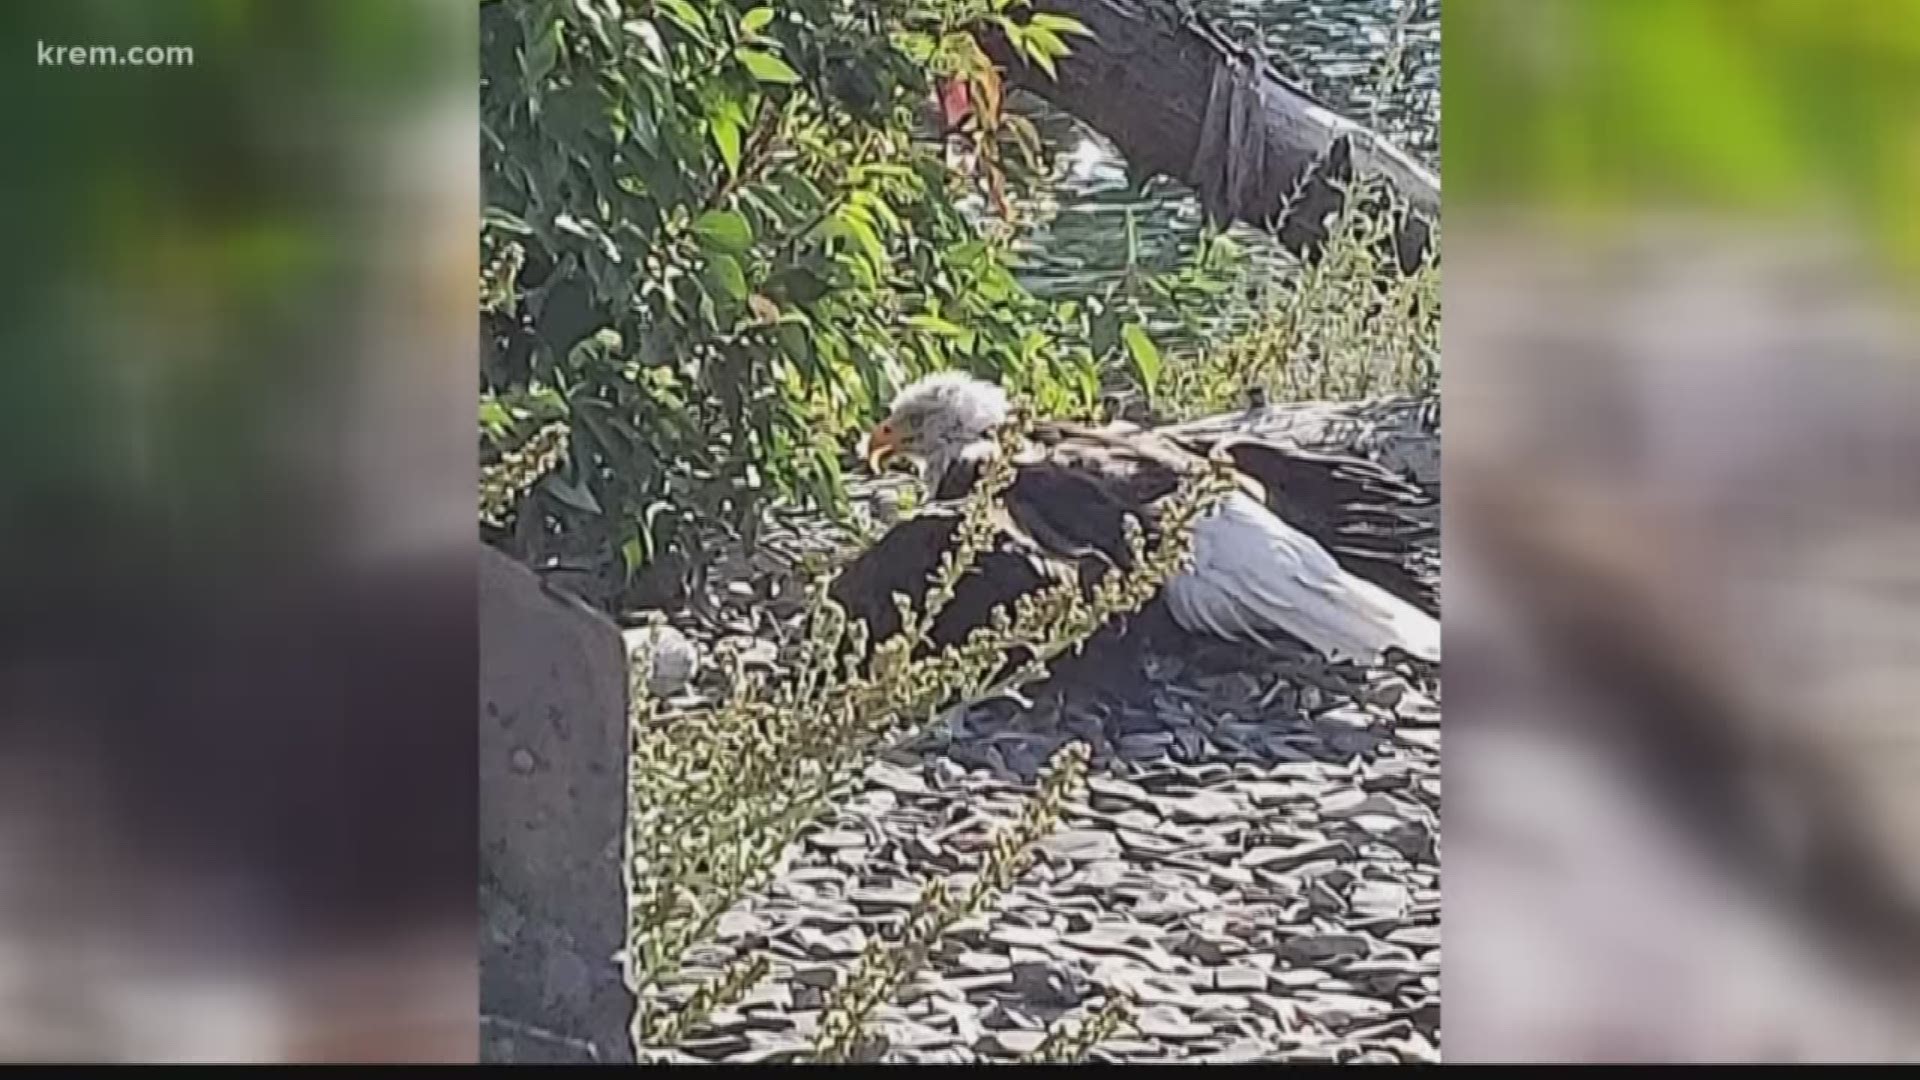 Woman helps save eagle from lead poisoning